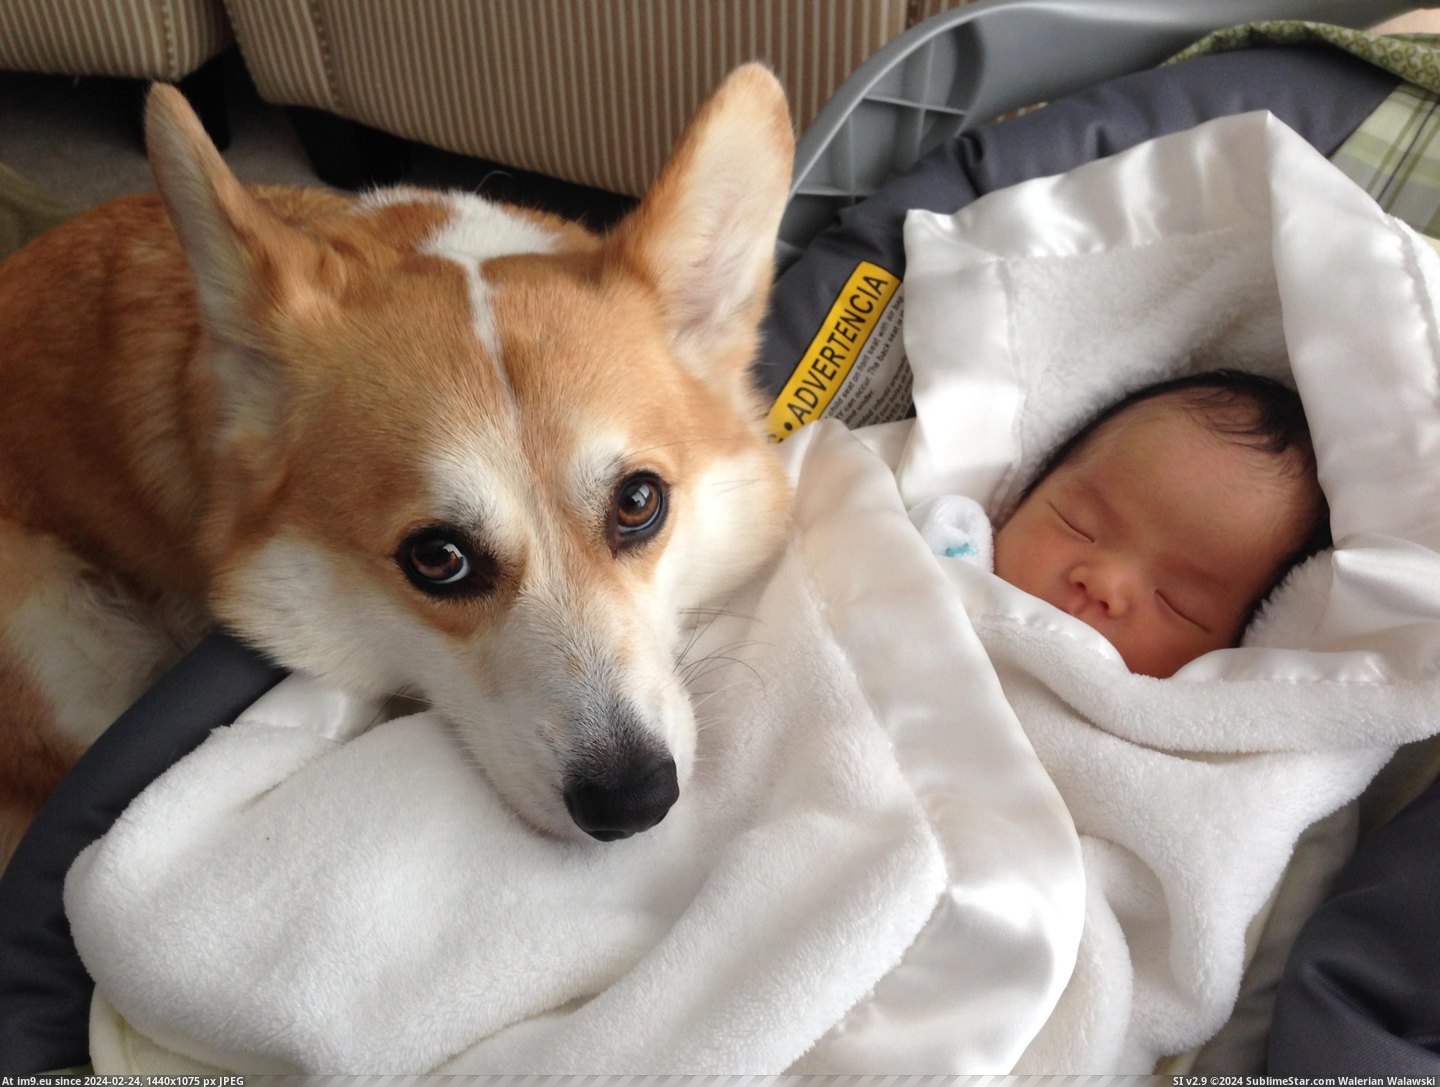 #Was #New #Ago #But #How #Daughter #Weeks #Born [Aww] My daughter was born three weeks ago. I worried about how my corgi would react but he's treating her like his new BFF... 1 Pic. (Obraz z album My r/AWW favs))